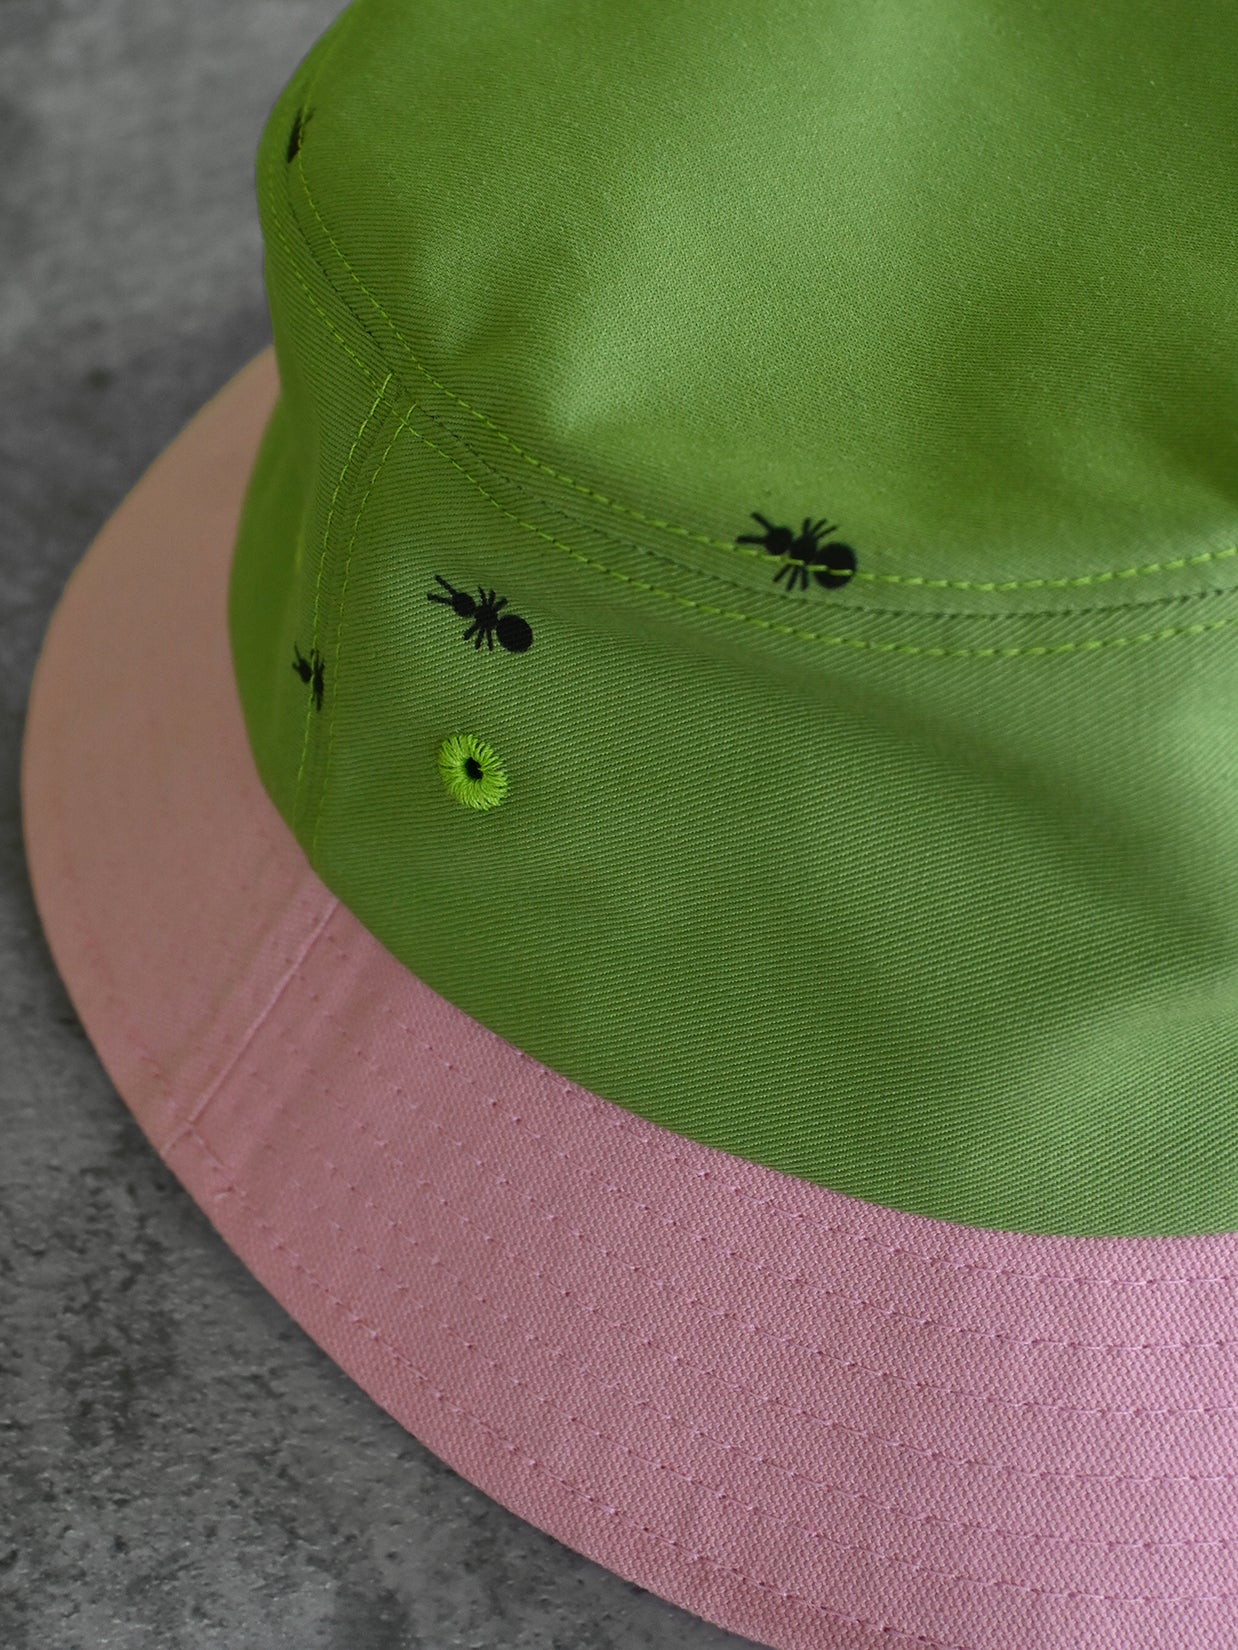 Natali Koromoto x HO HOS HOLE IN THE WALL brand "Ants on Your Hat" printed bucket hat in Avocado Green and True Pink dye colorway combo